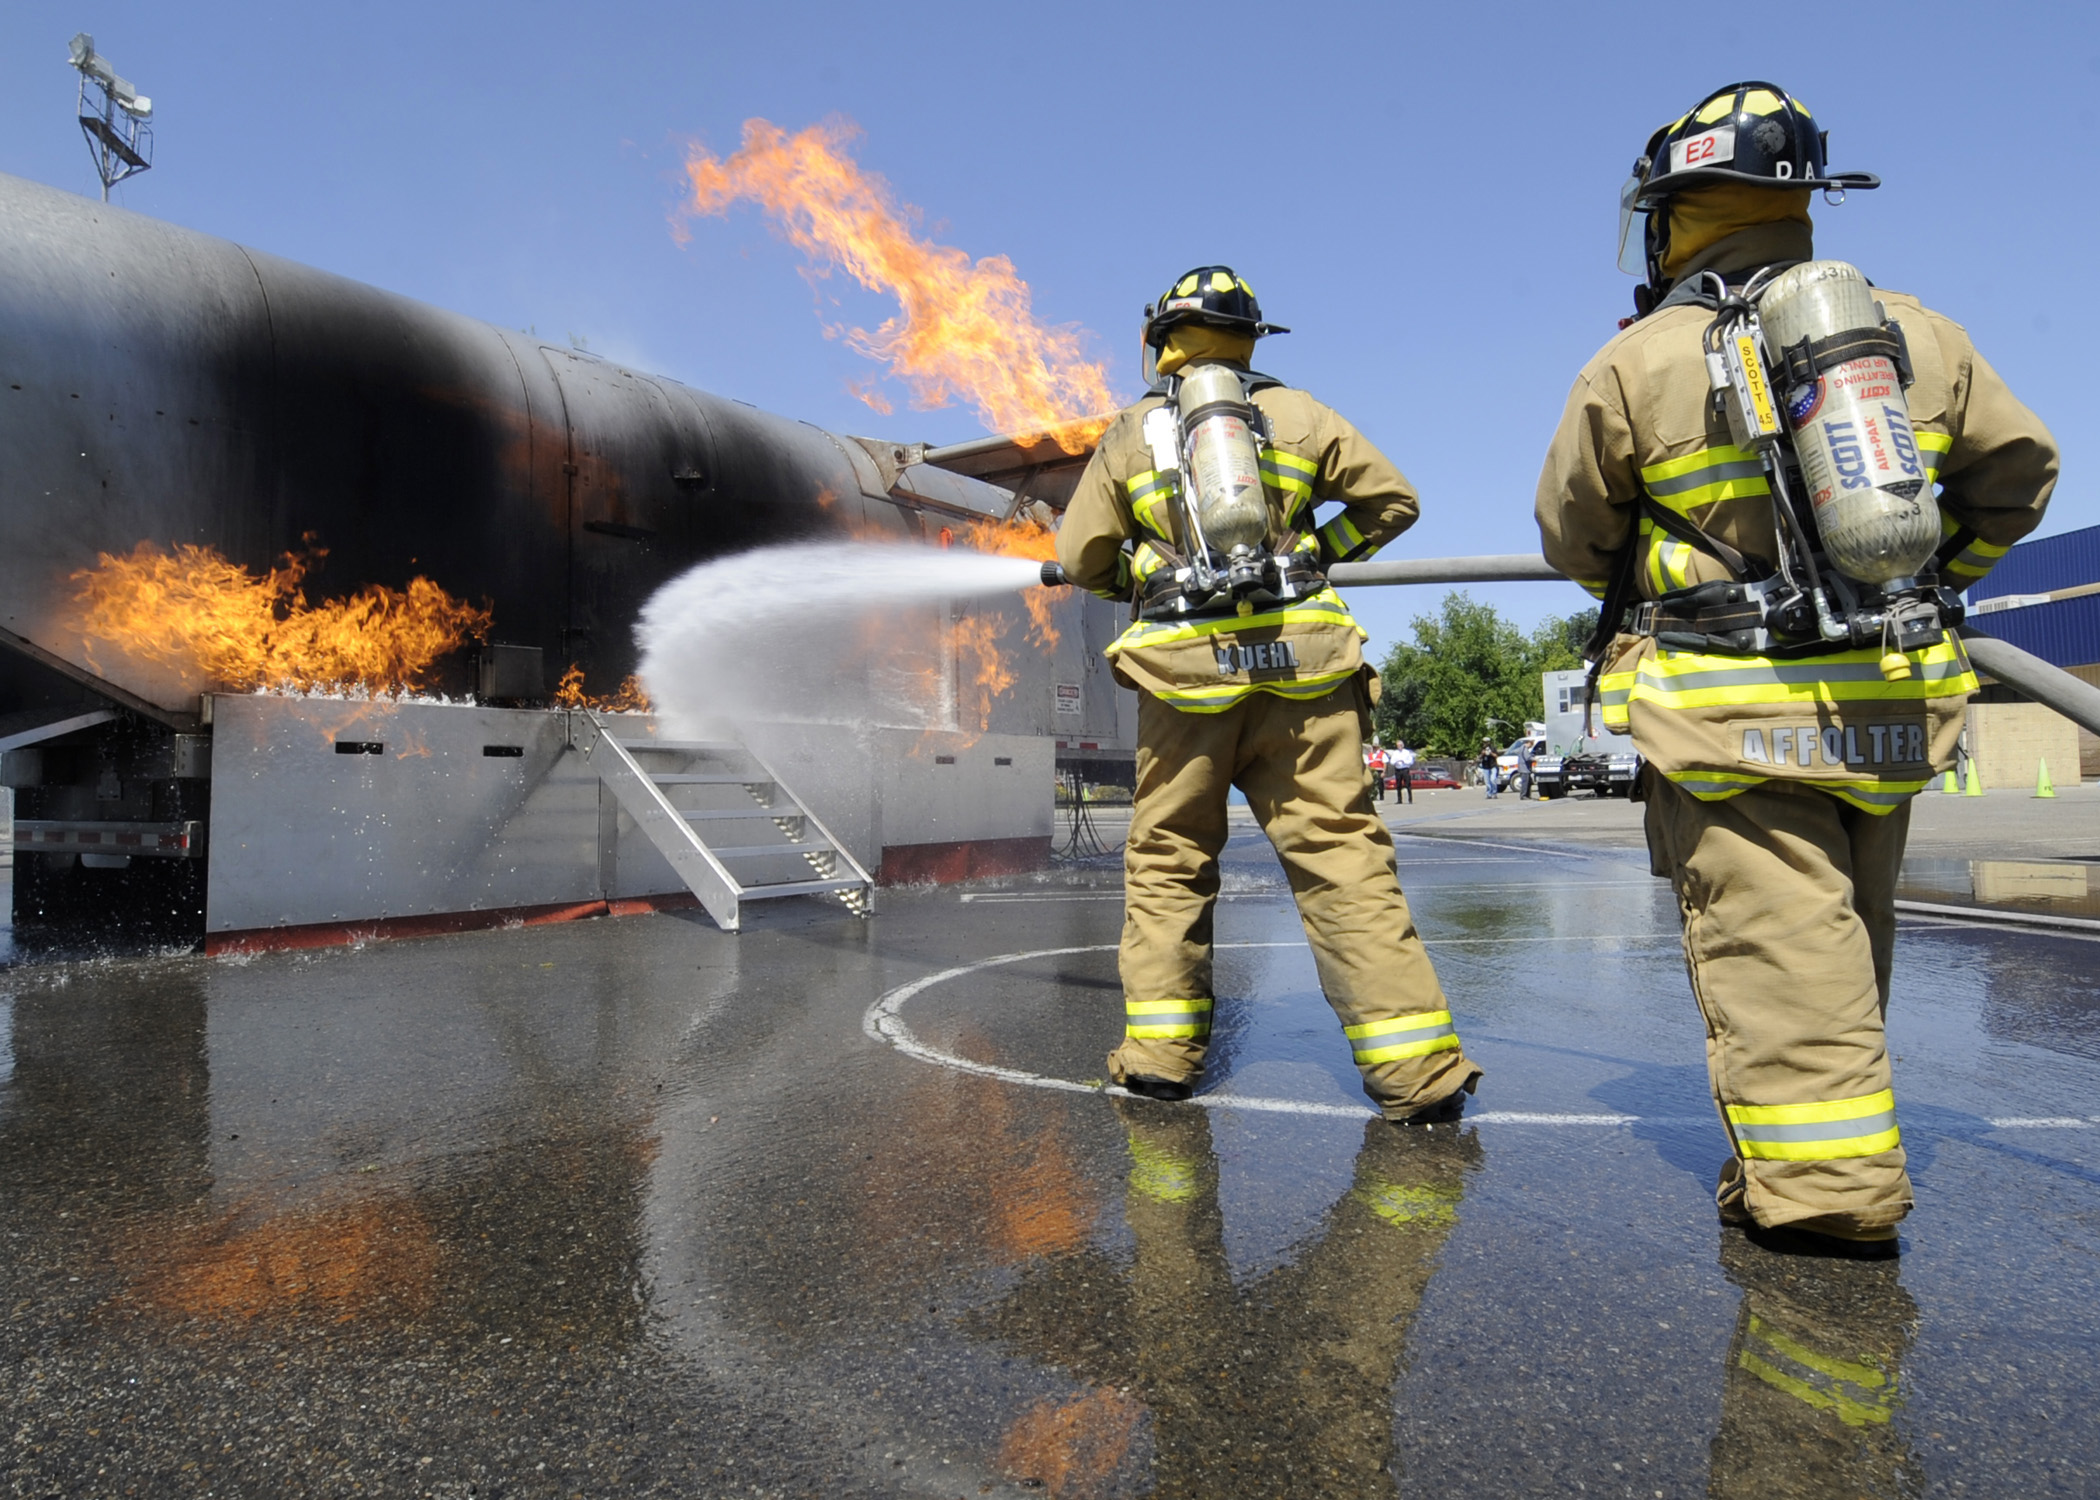 Are you in more danger than a Firefighter at work? safety tips at work